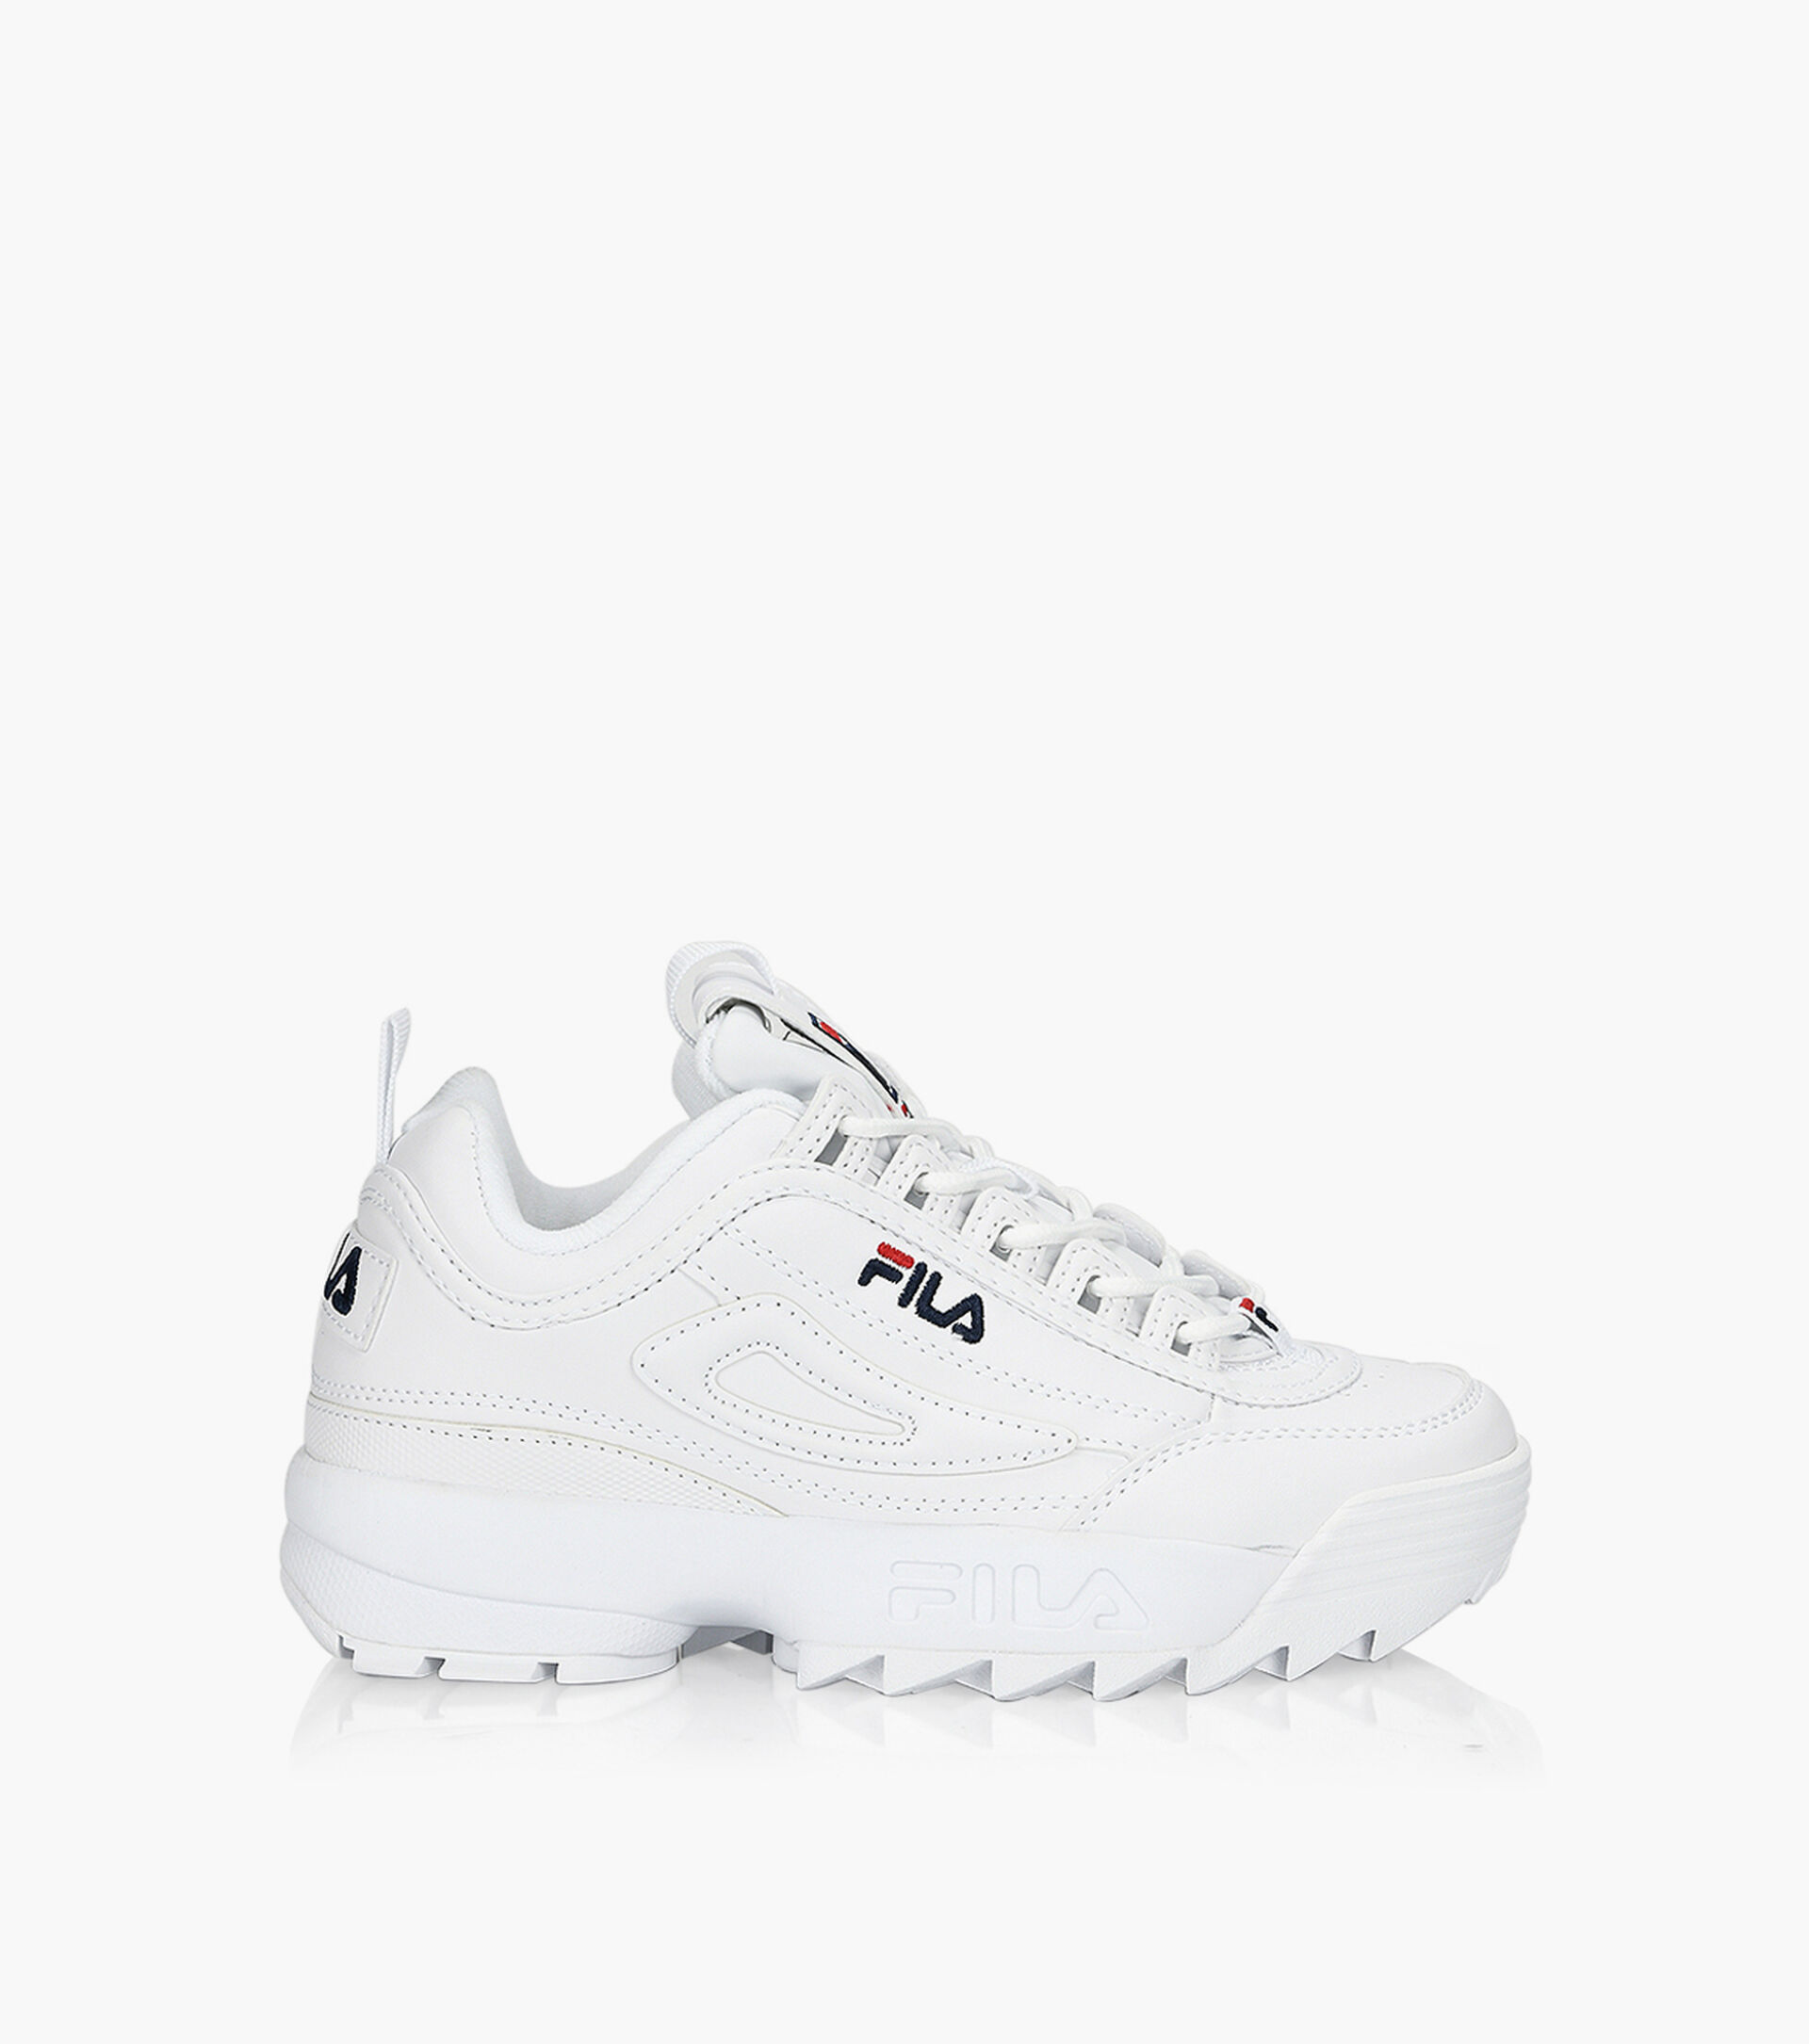 FILA DISRUPTOR 2 PREMIUM - Synthetic | Browns Shoes